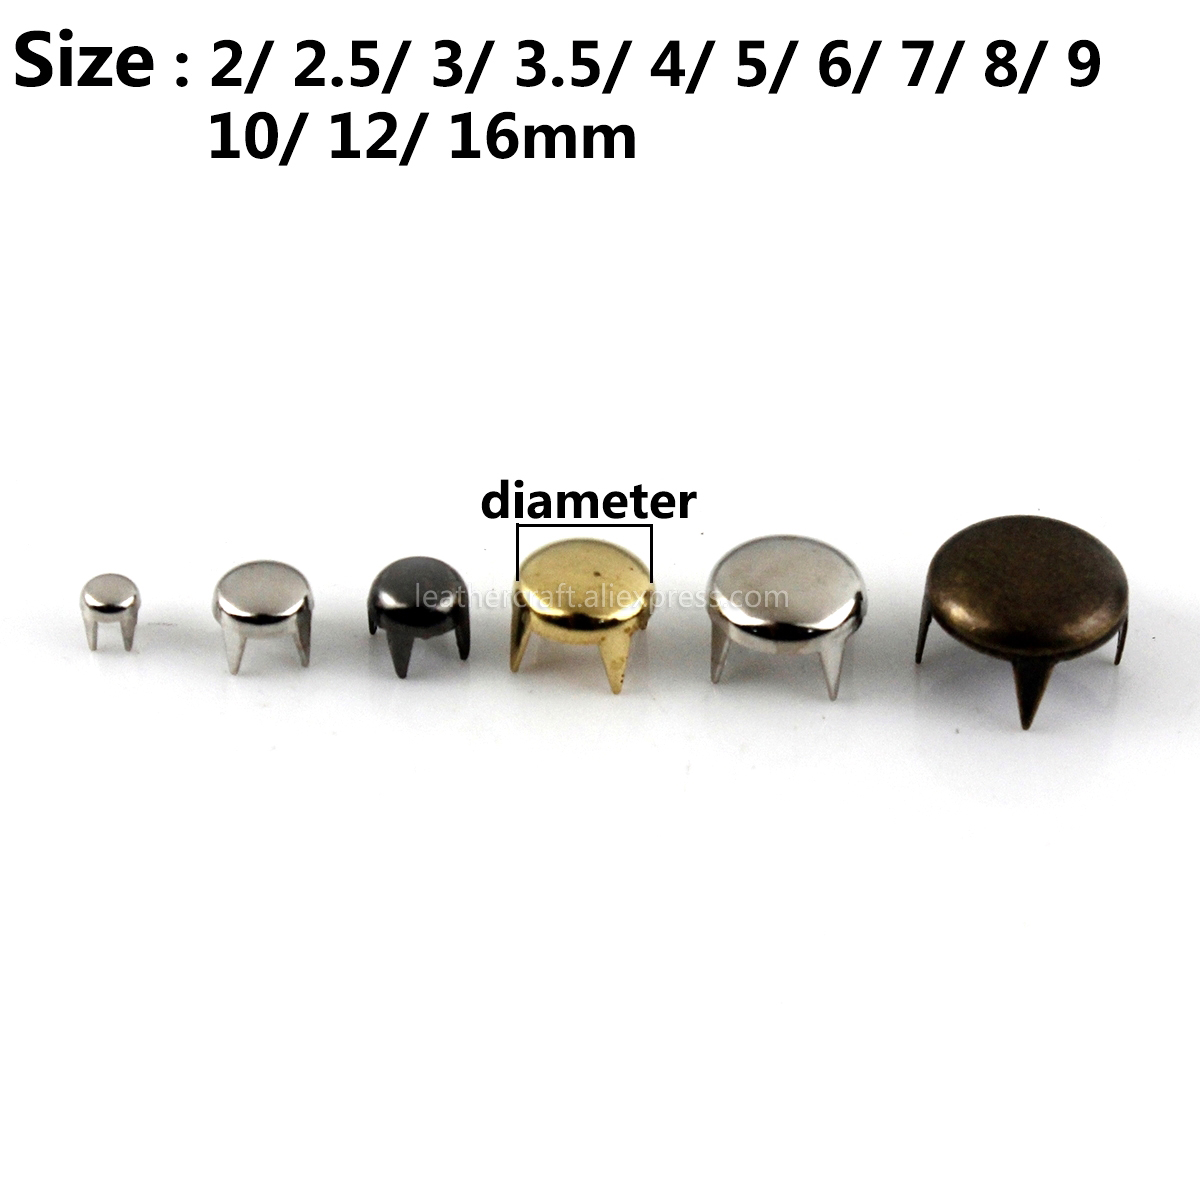 100sets 2-6mm Metal Round Cap Claw Rivets Studs Leather Craft Bag Belt Garment Shoes Collar Decor Accessories 13 Sizes